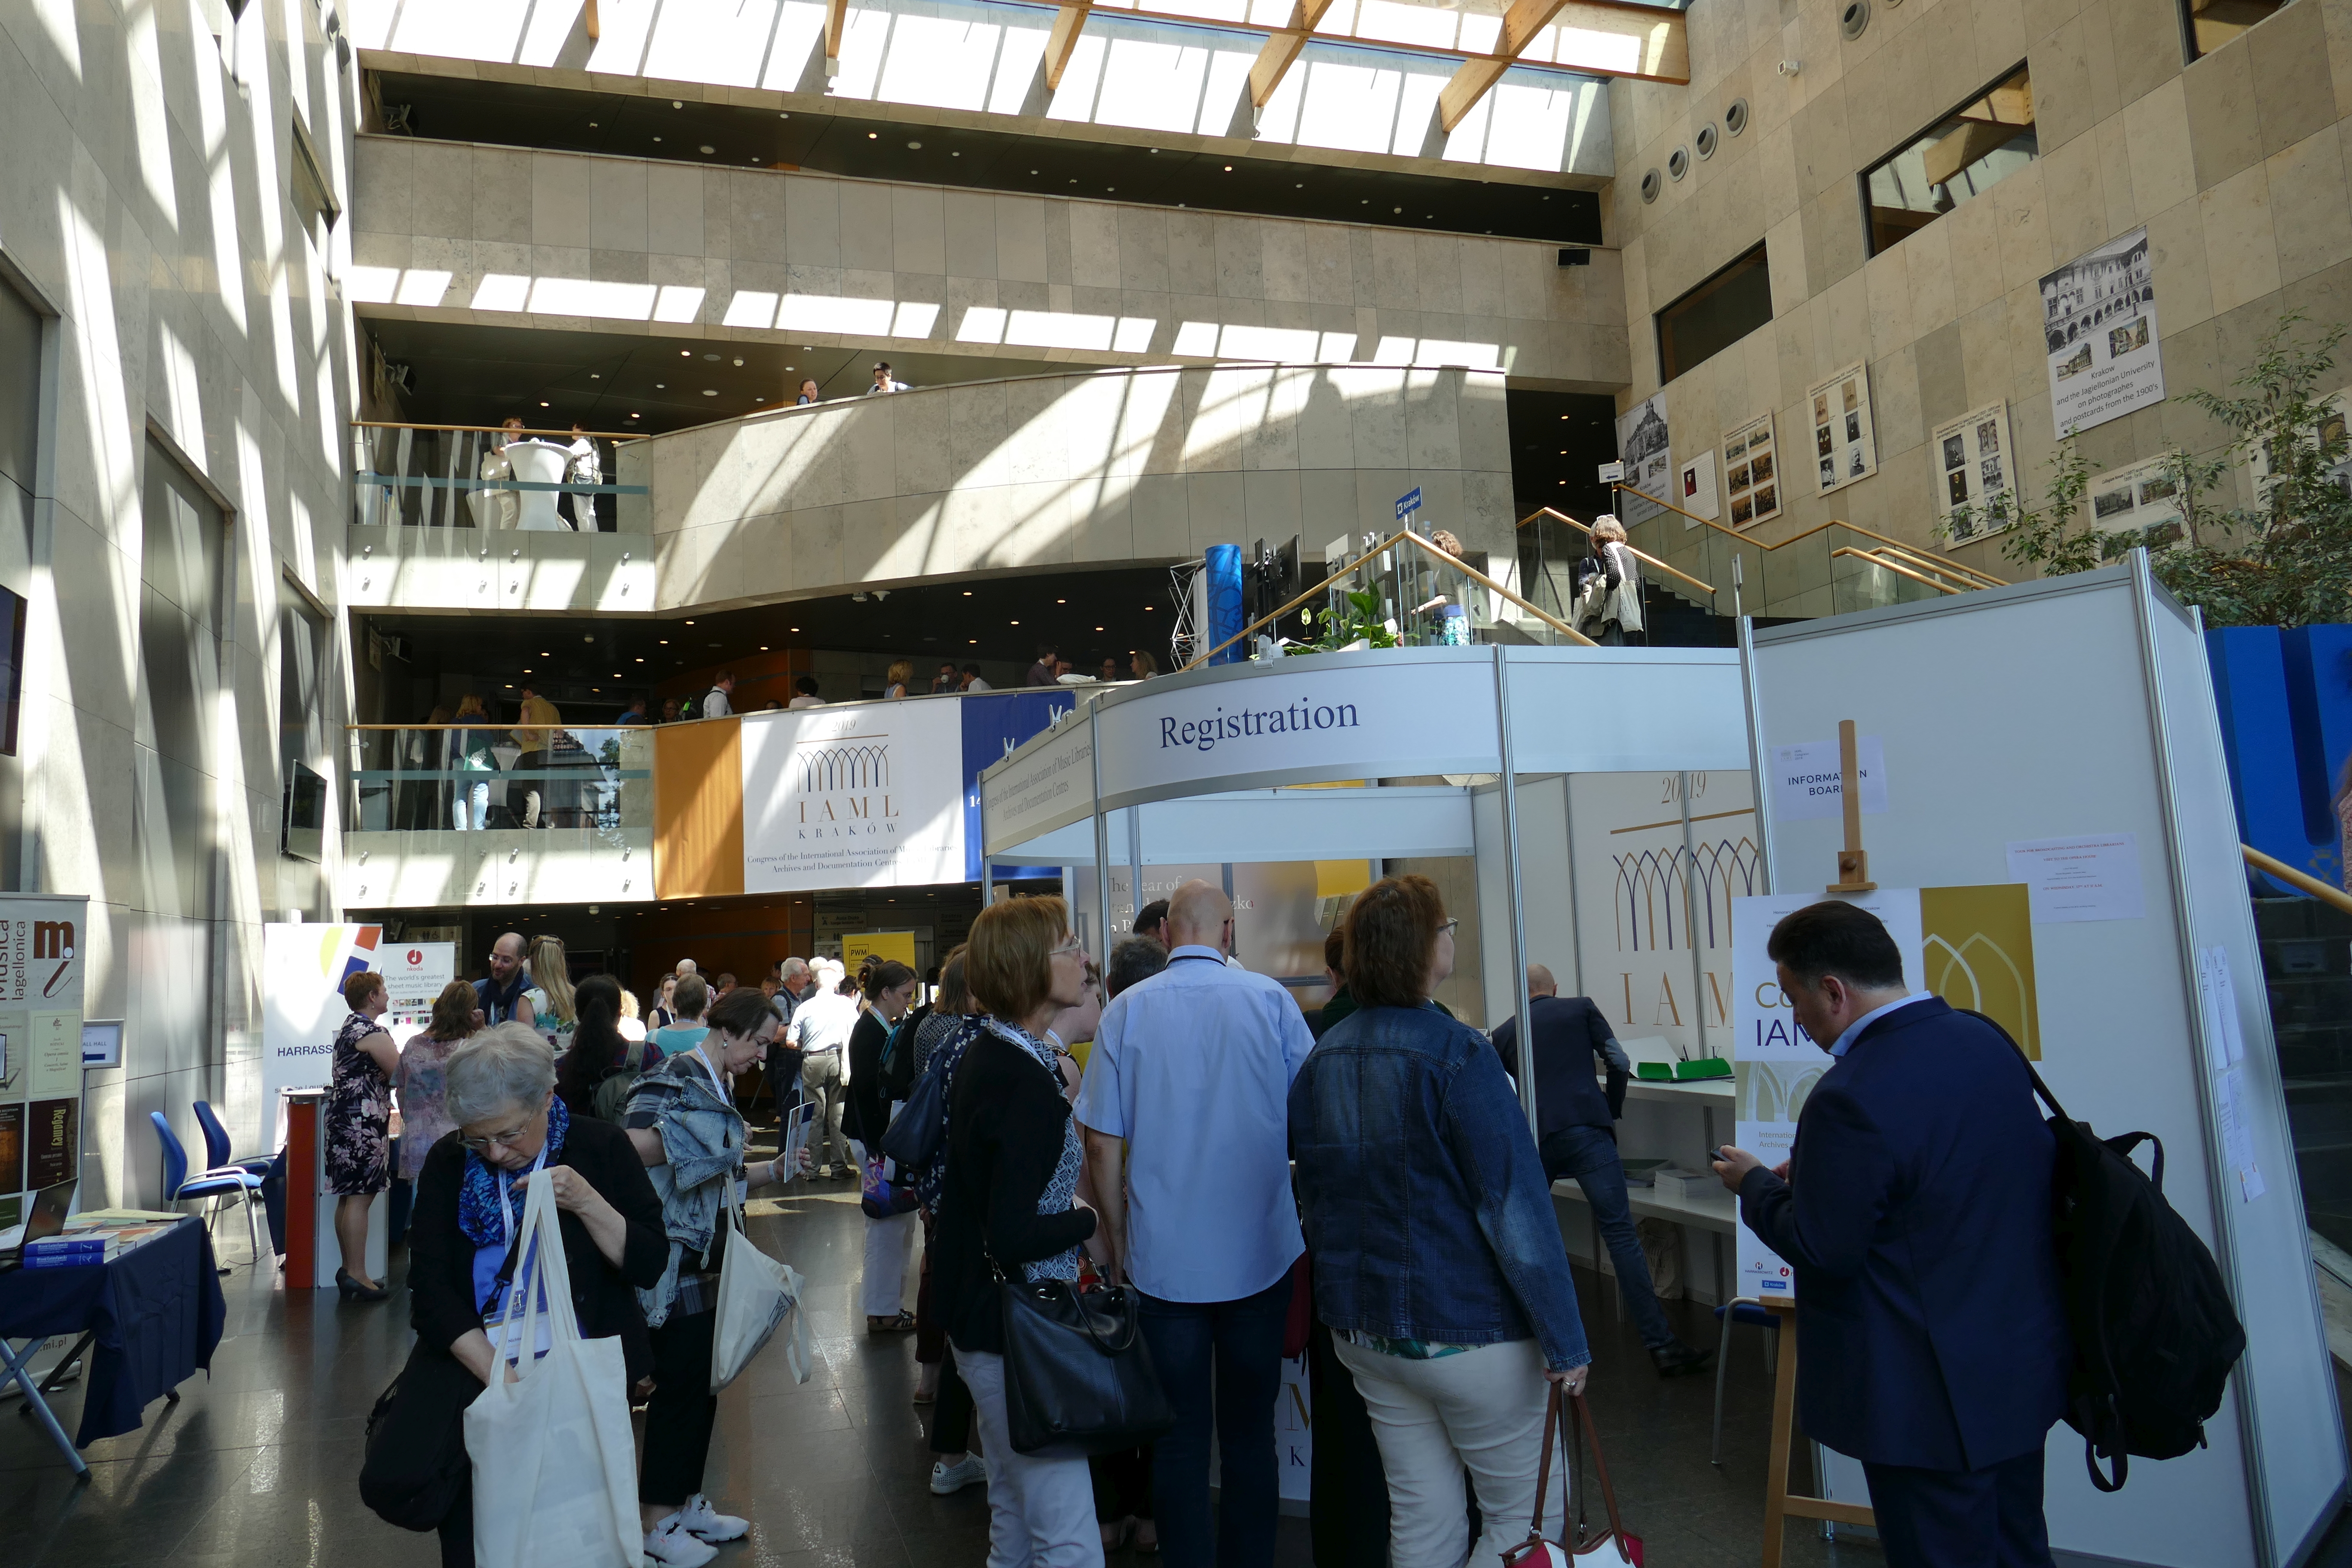 Registration at IAML 2019. Photo by Petra Wagenknecht